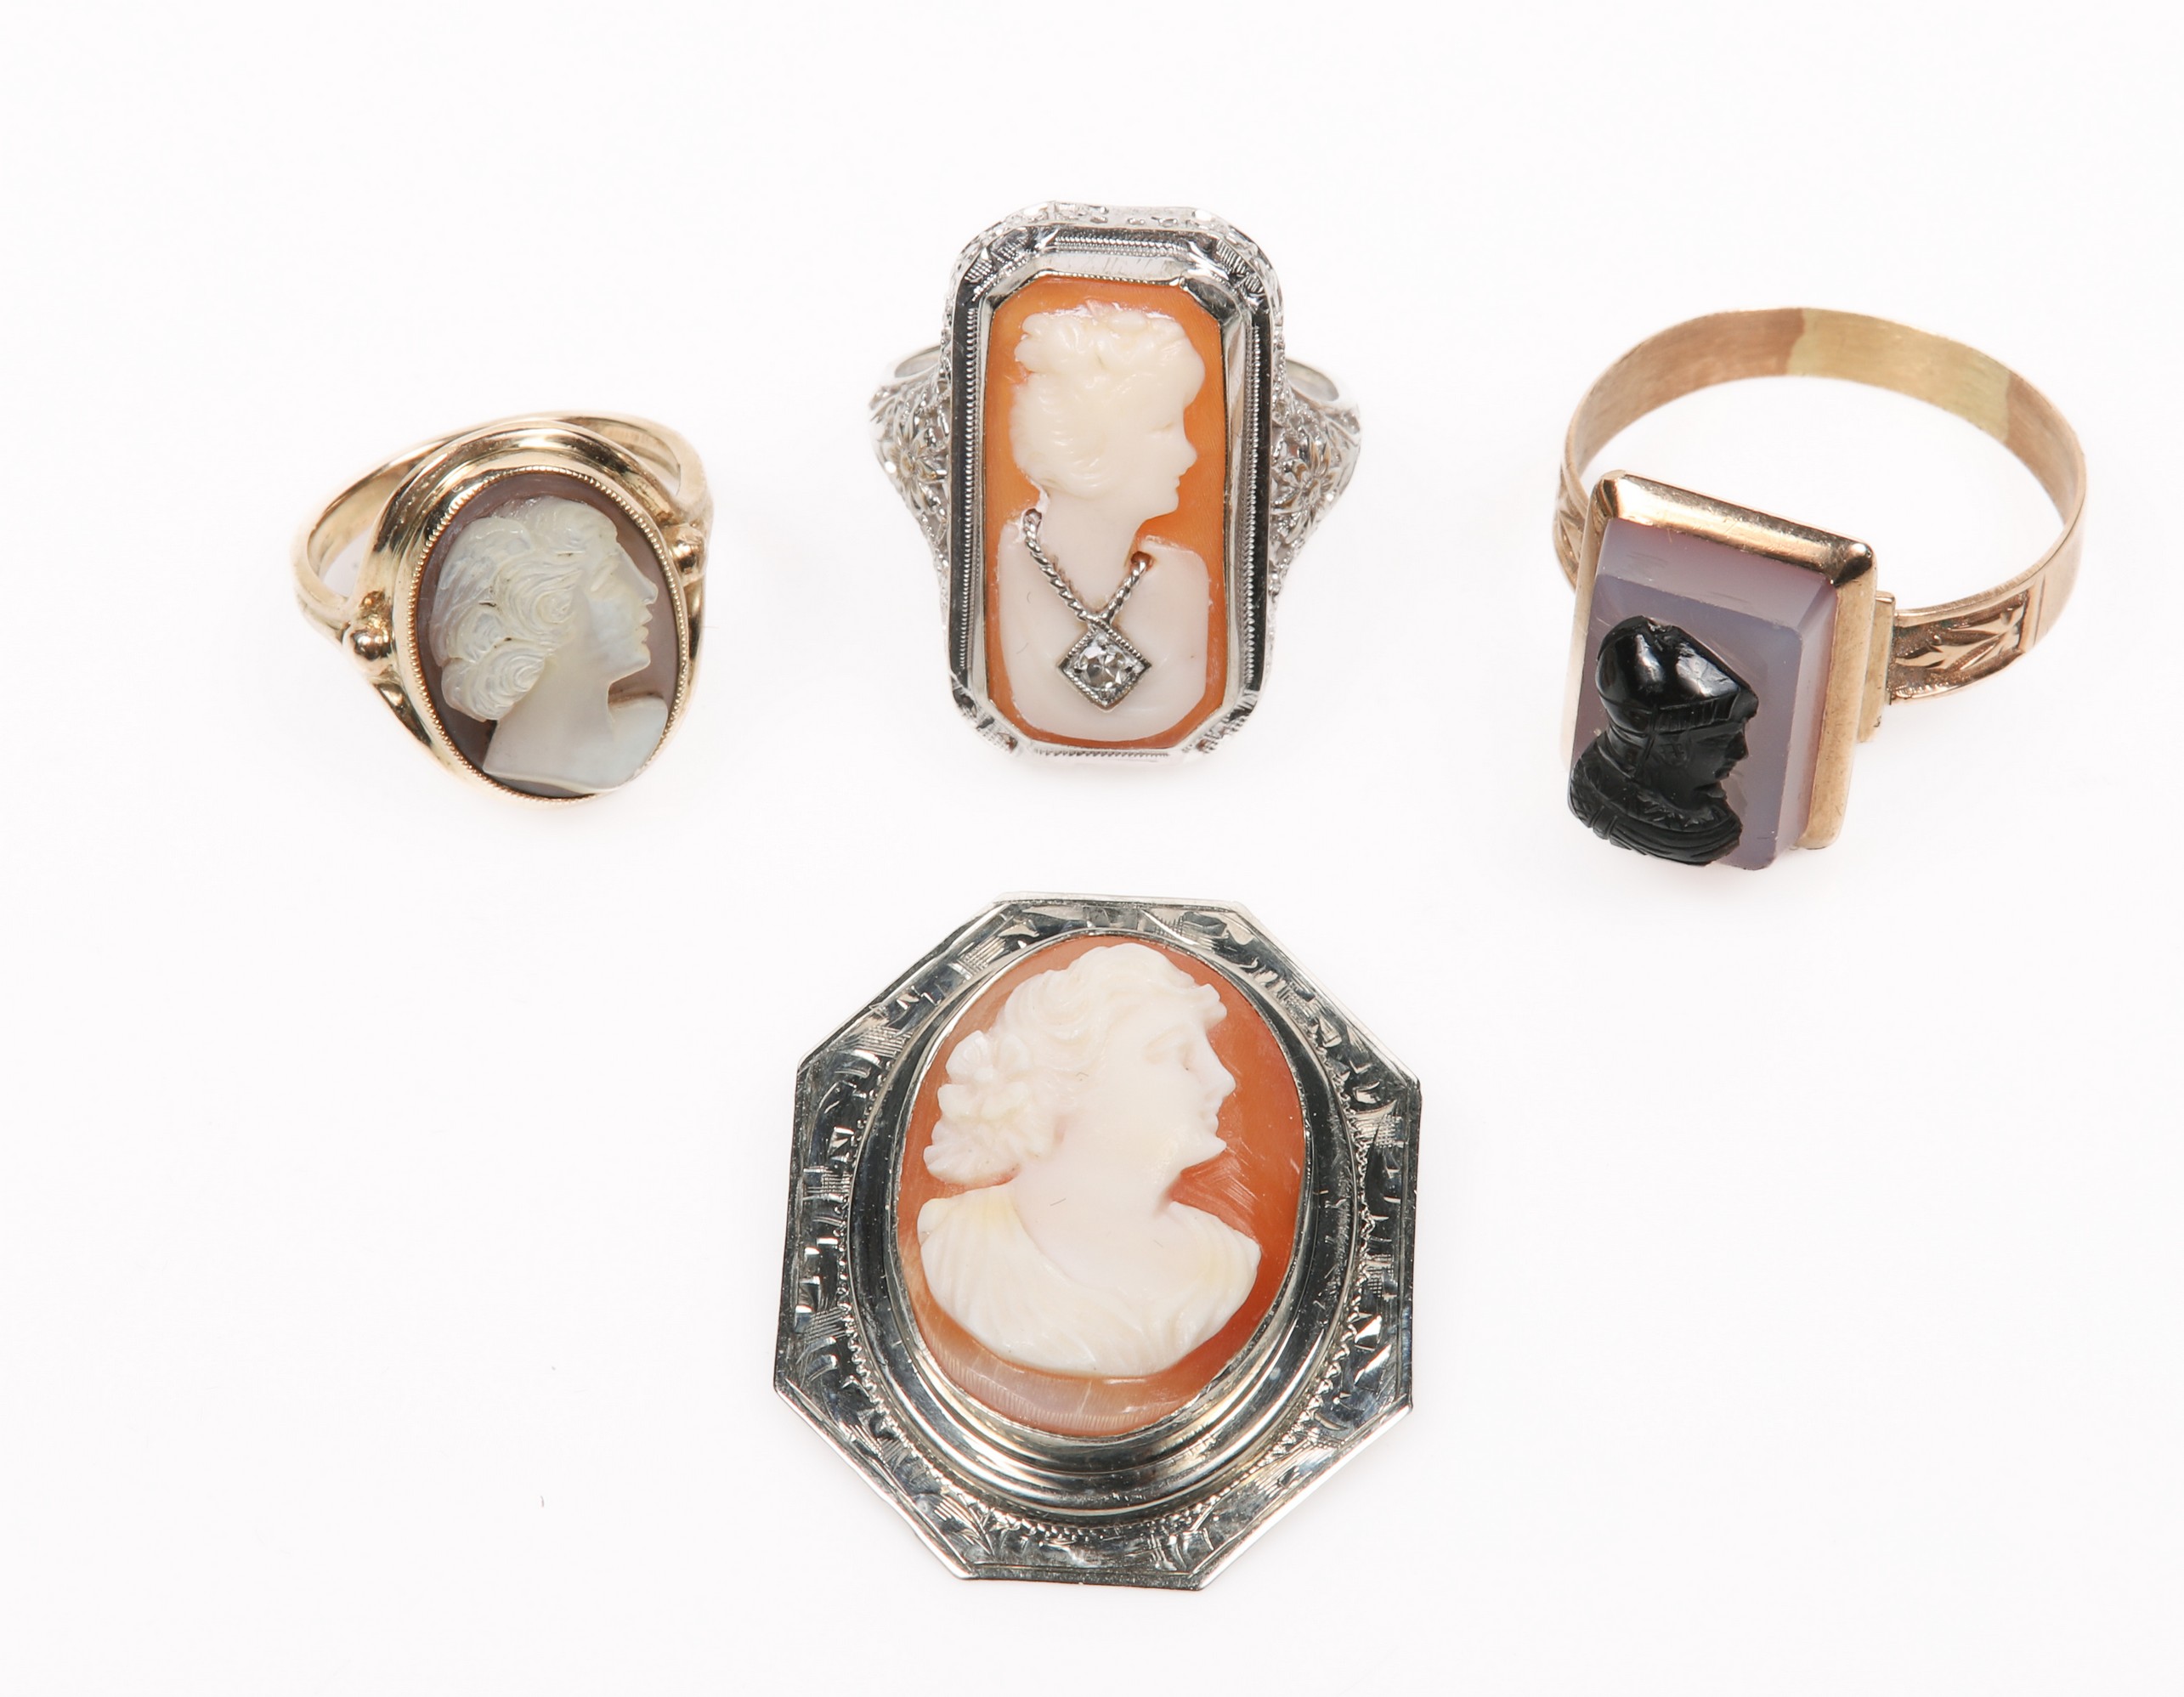  4 Cameo rings and brooch to include 2e16f2